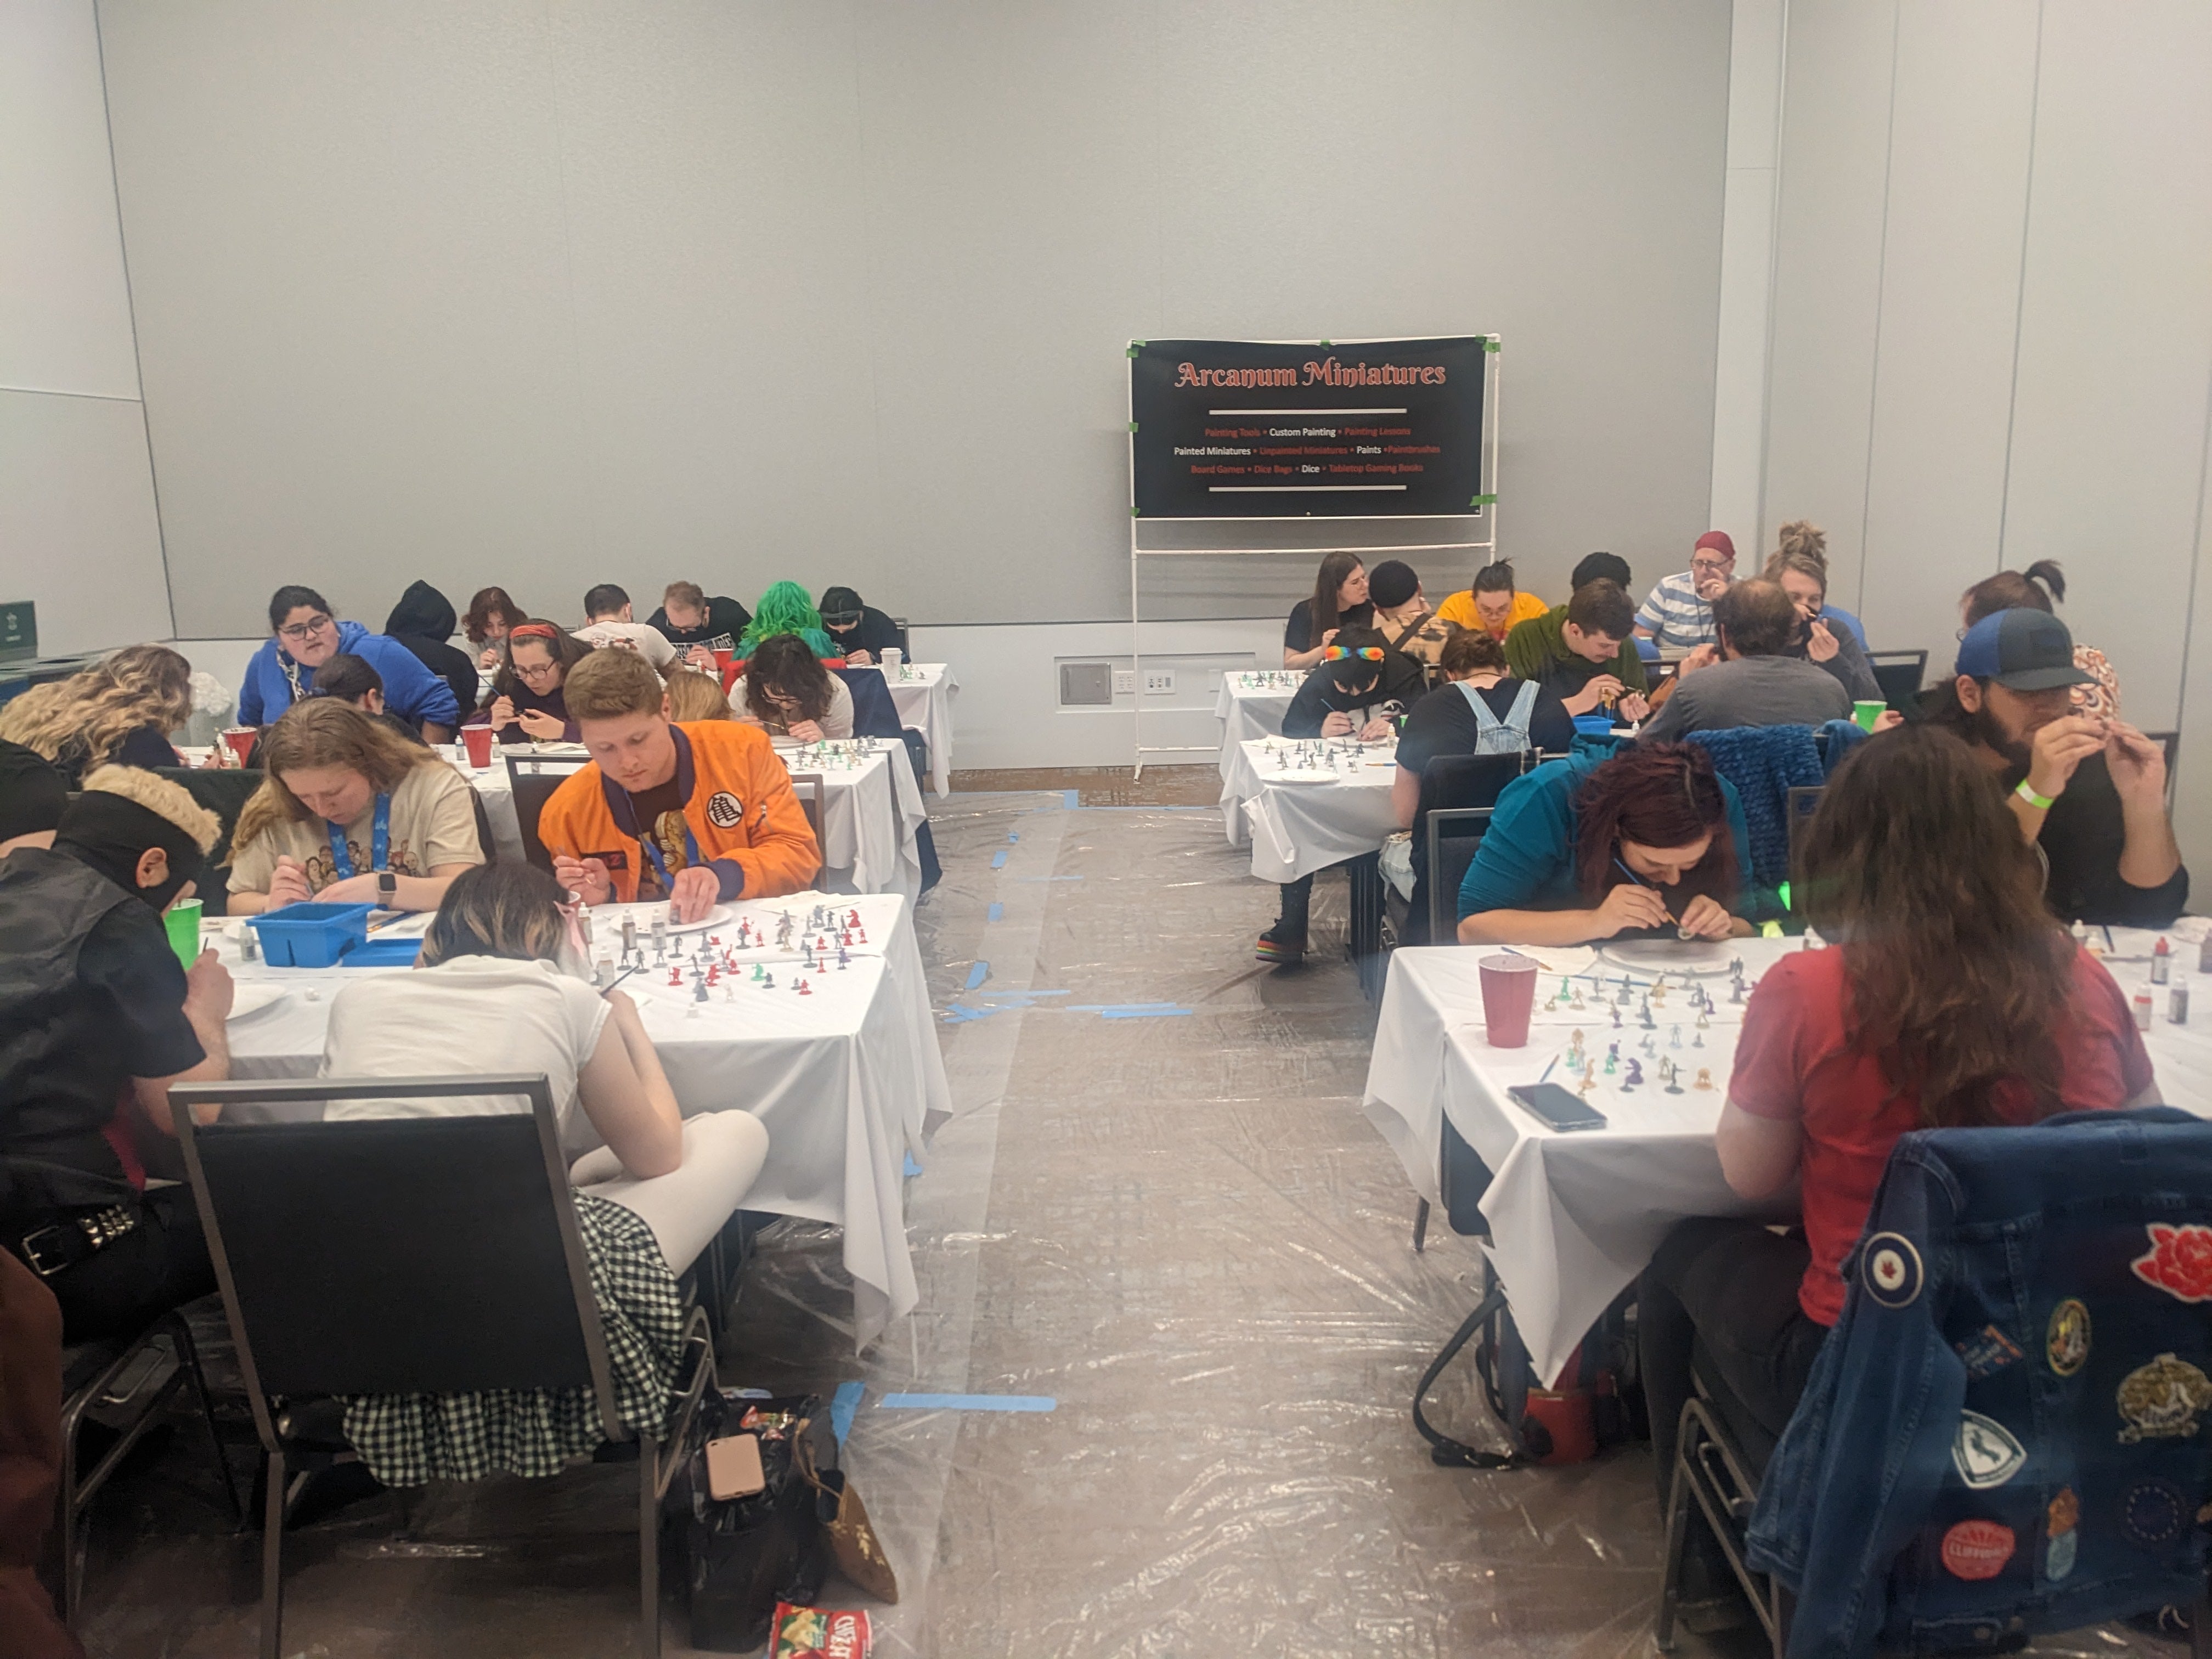 Photograph of fans sitting in a room at tables painting miniatures